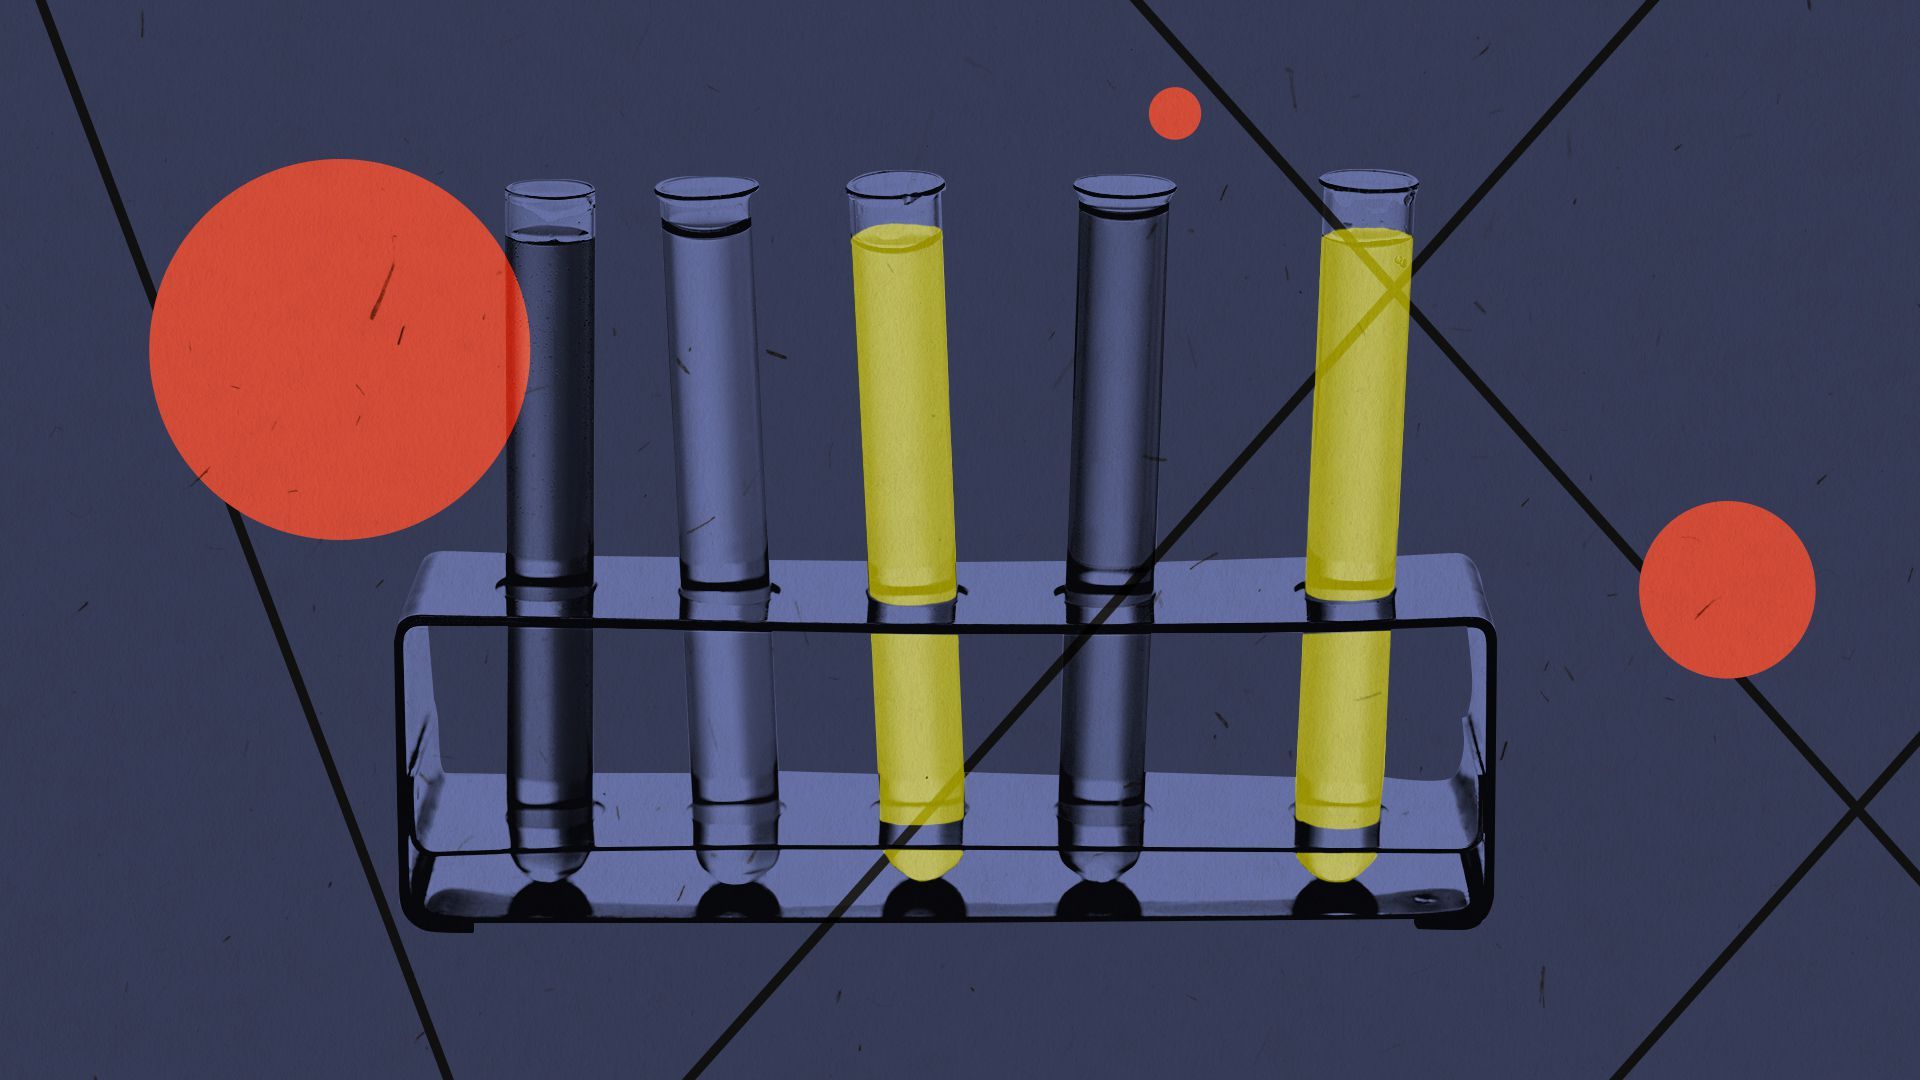 Illustration of a rack of test tubes surrounded by lines and circles.  